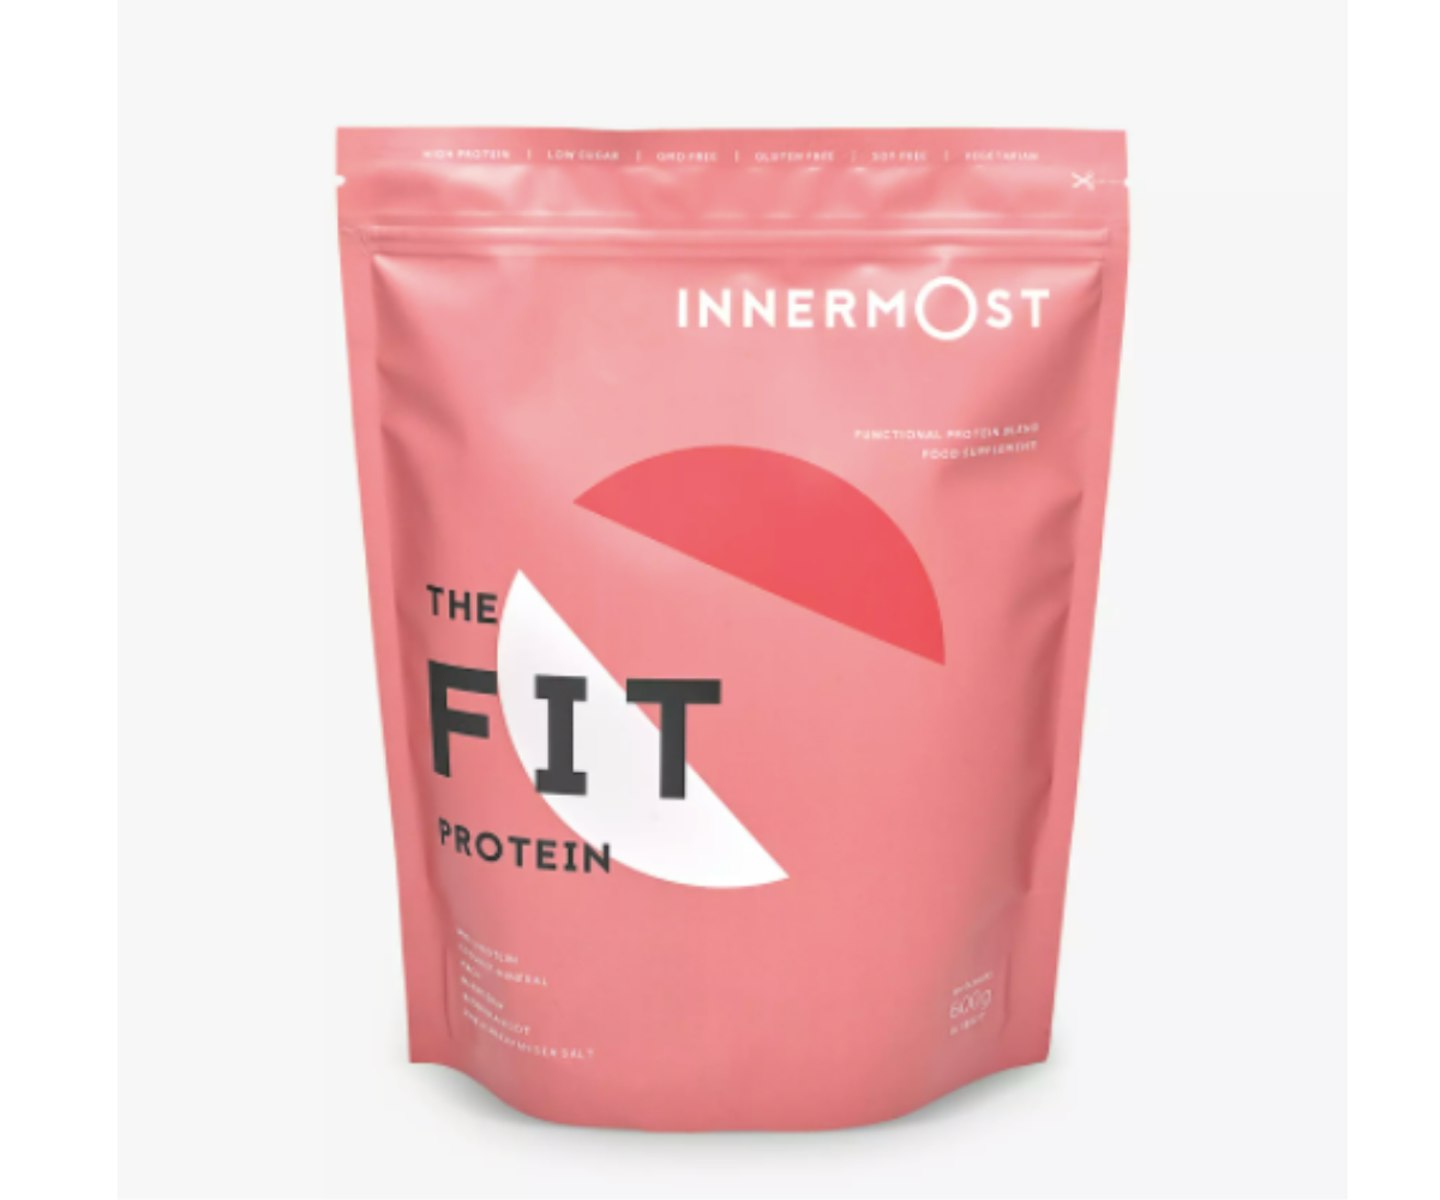 Innermost The Fit Protein Powder, Chocolate